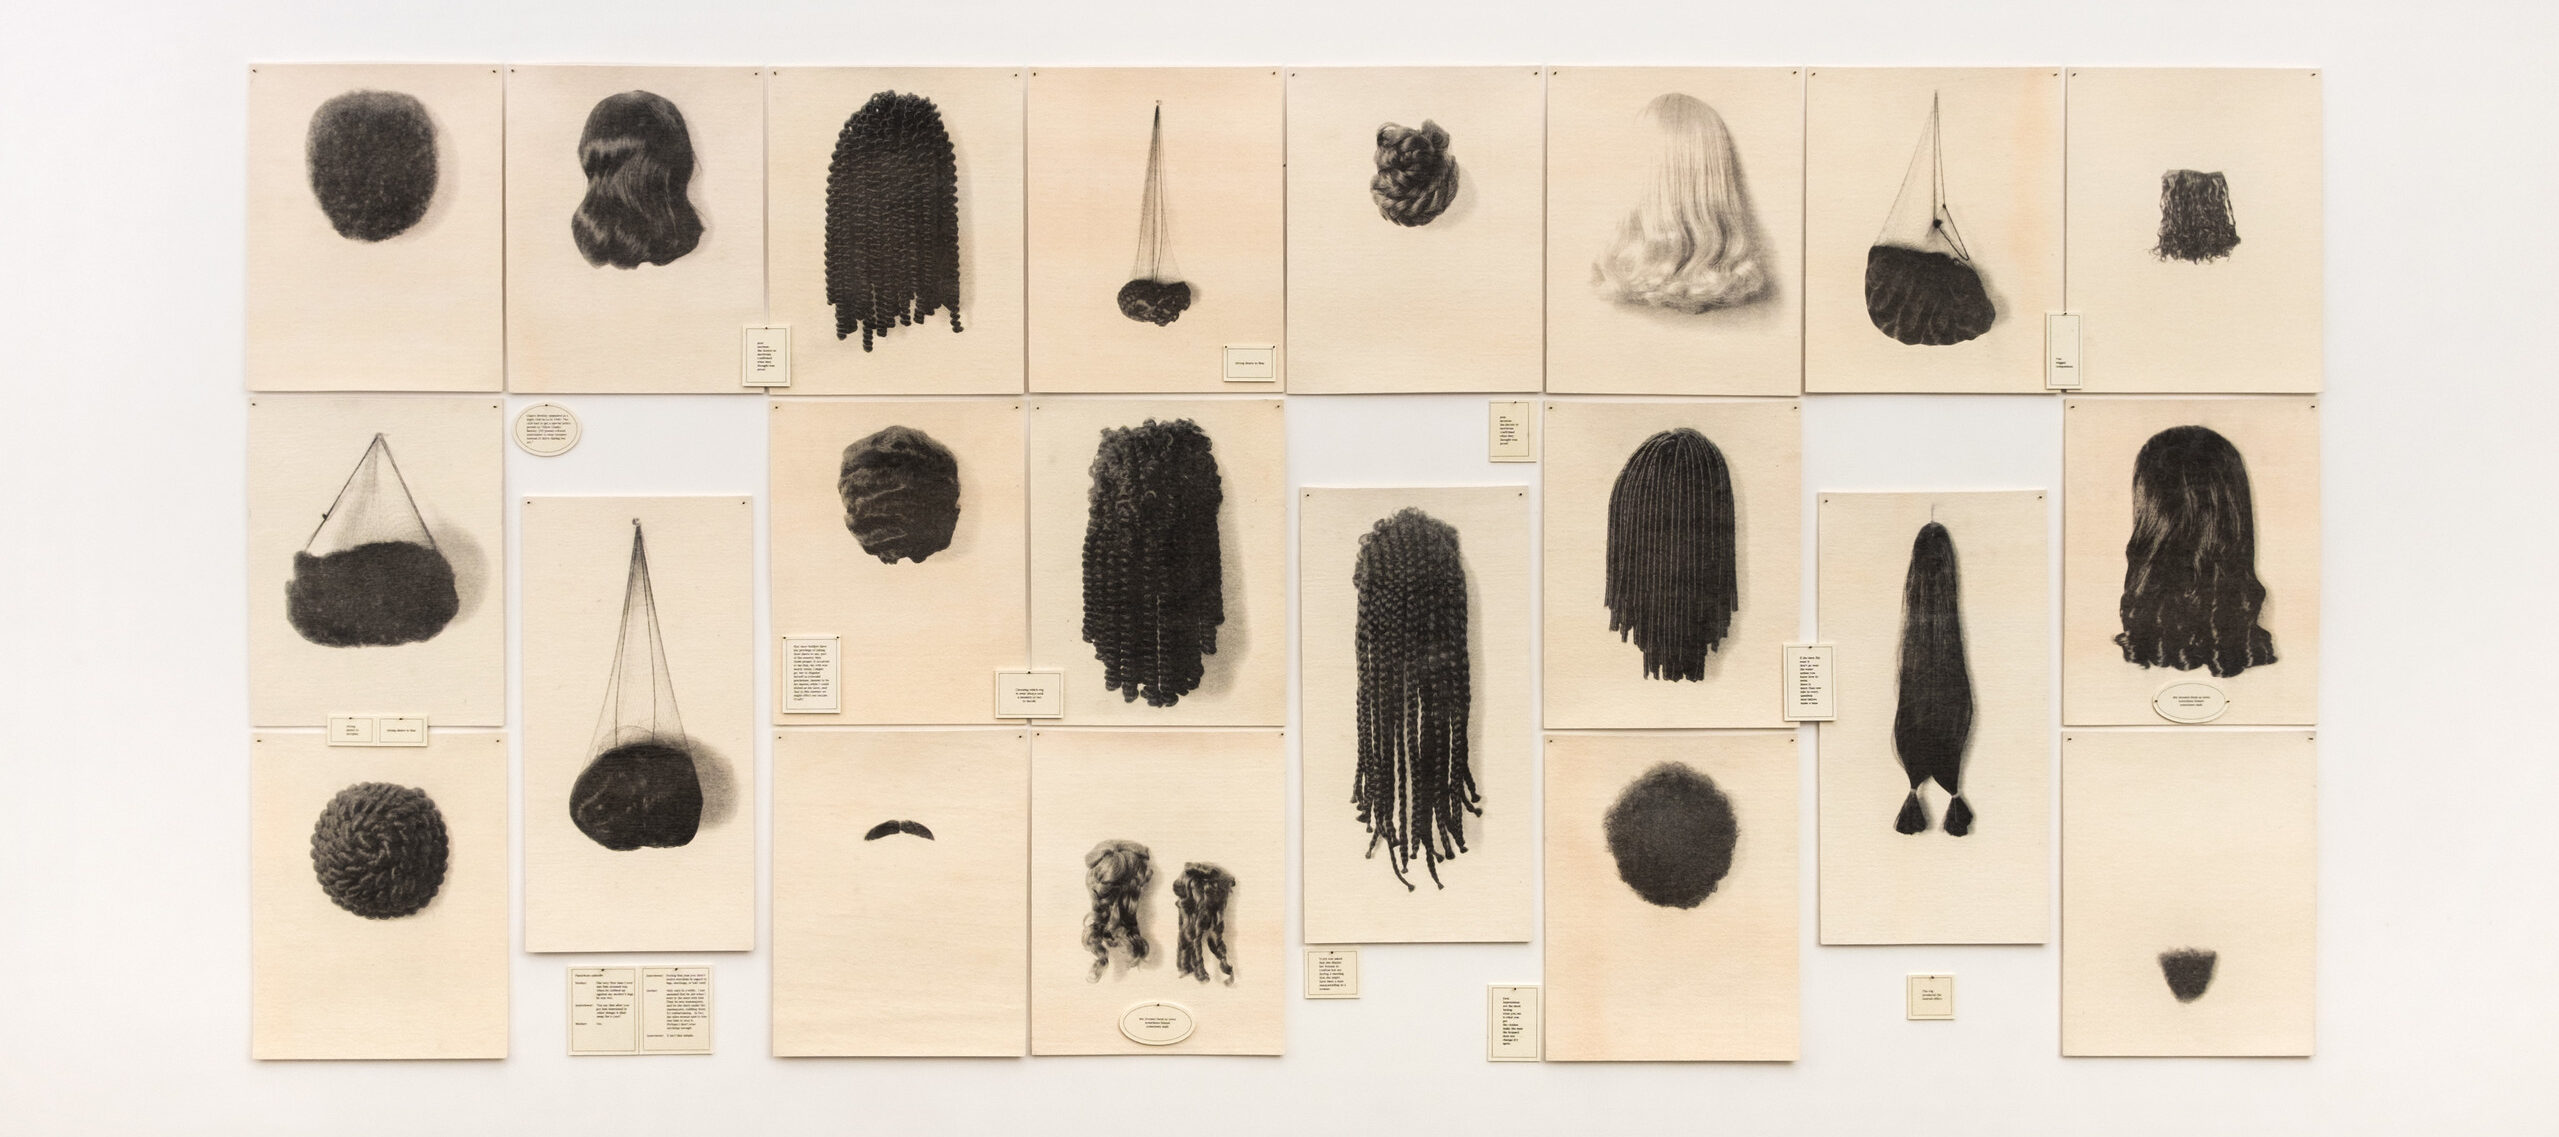 21 off-white, rectangular panels arranged in a large rectangle. A wig is pinned on each panel, and each wig is styled differently, showcasing waves, curls, braids, dreadlocks, and more. All of the wigs are dark-colored, except for one platinum blonde wig at the top.